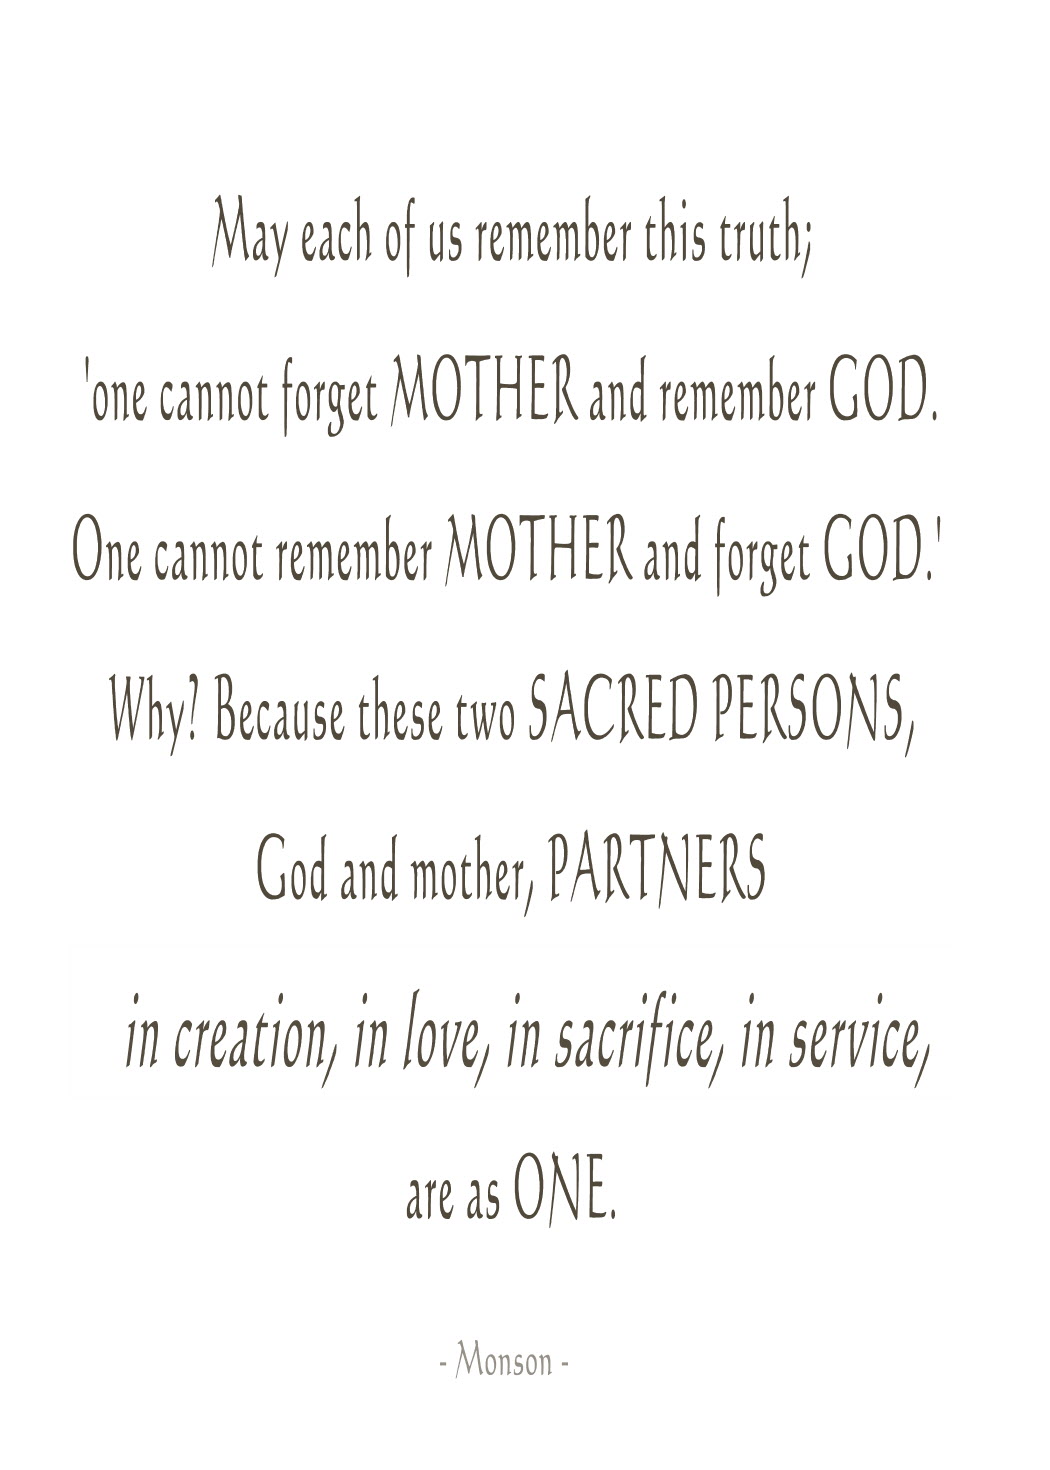 e cannot for mother and remember God